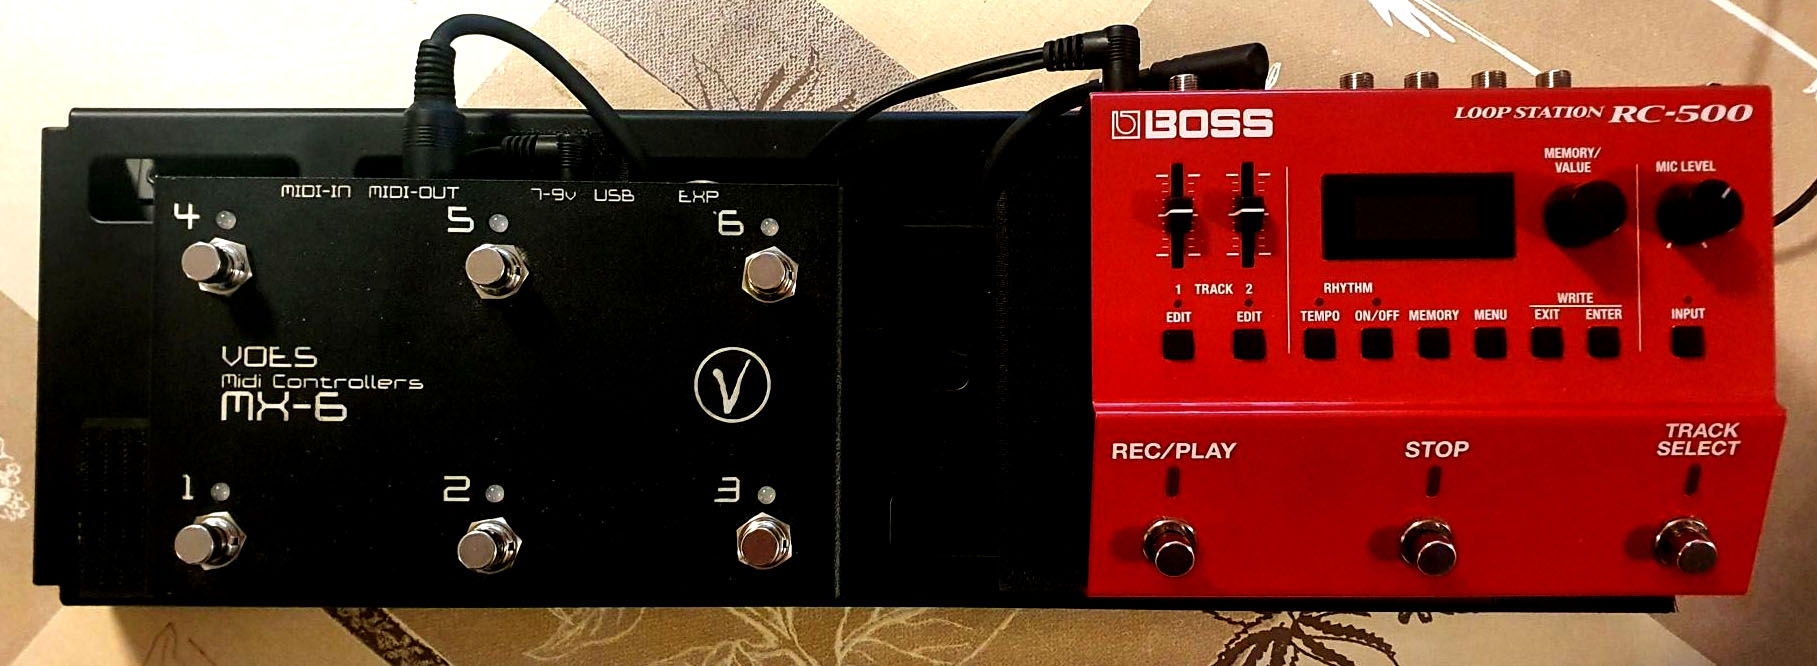 Voes MX-6 & Line6 HX Effects